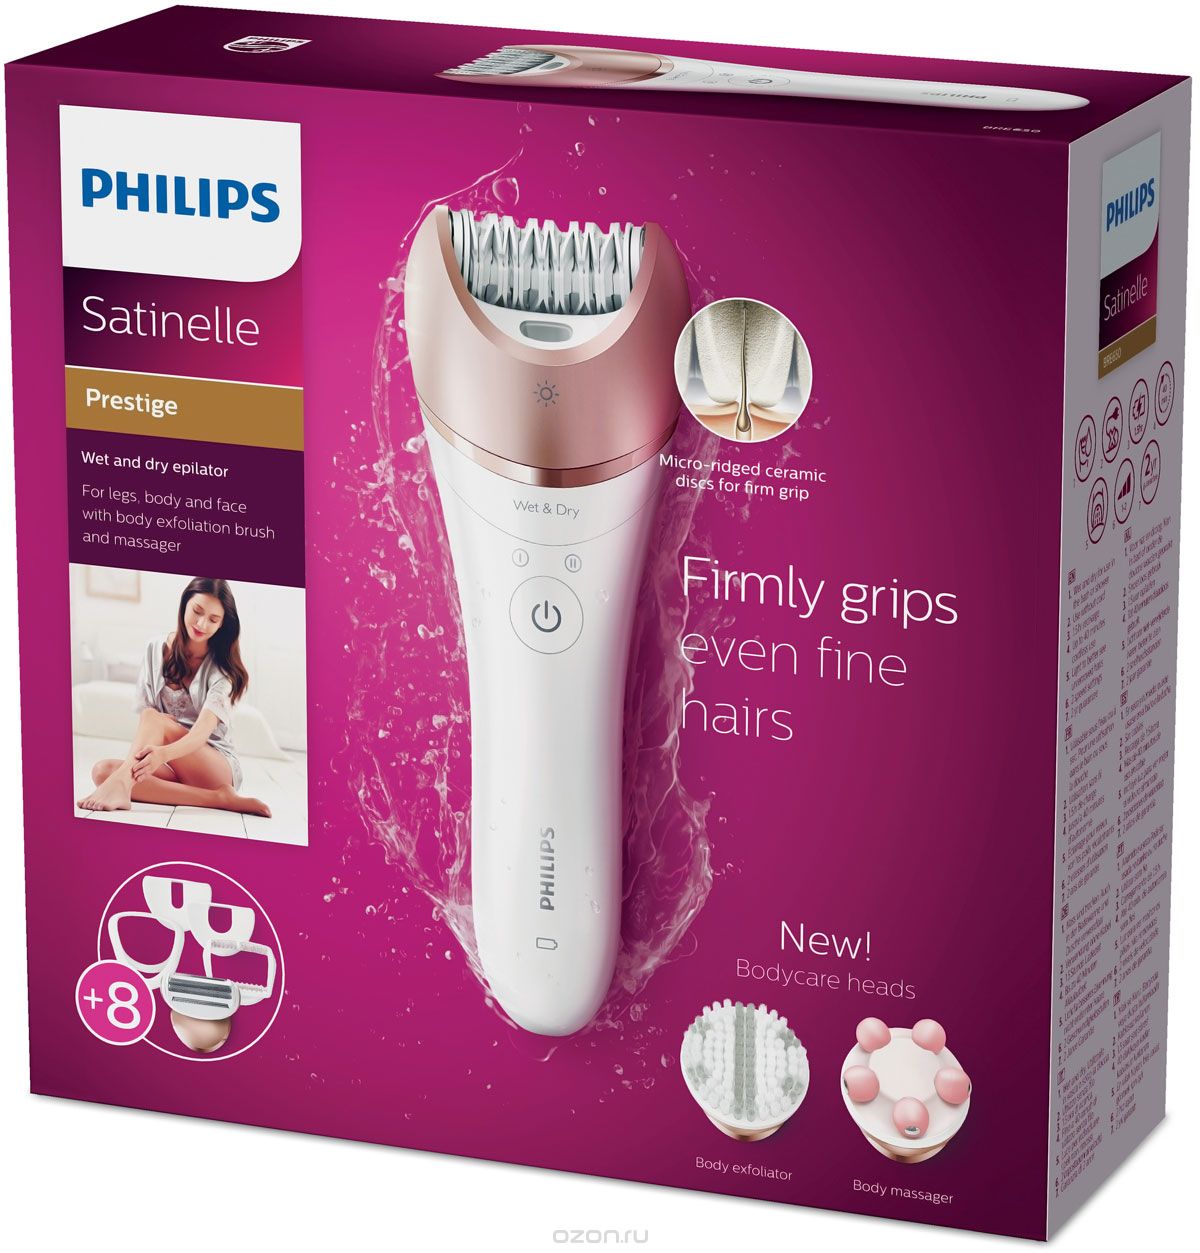  8  1 Philips Satinelle, BRE650,   , White Pink